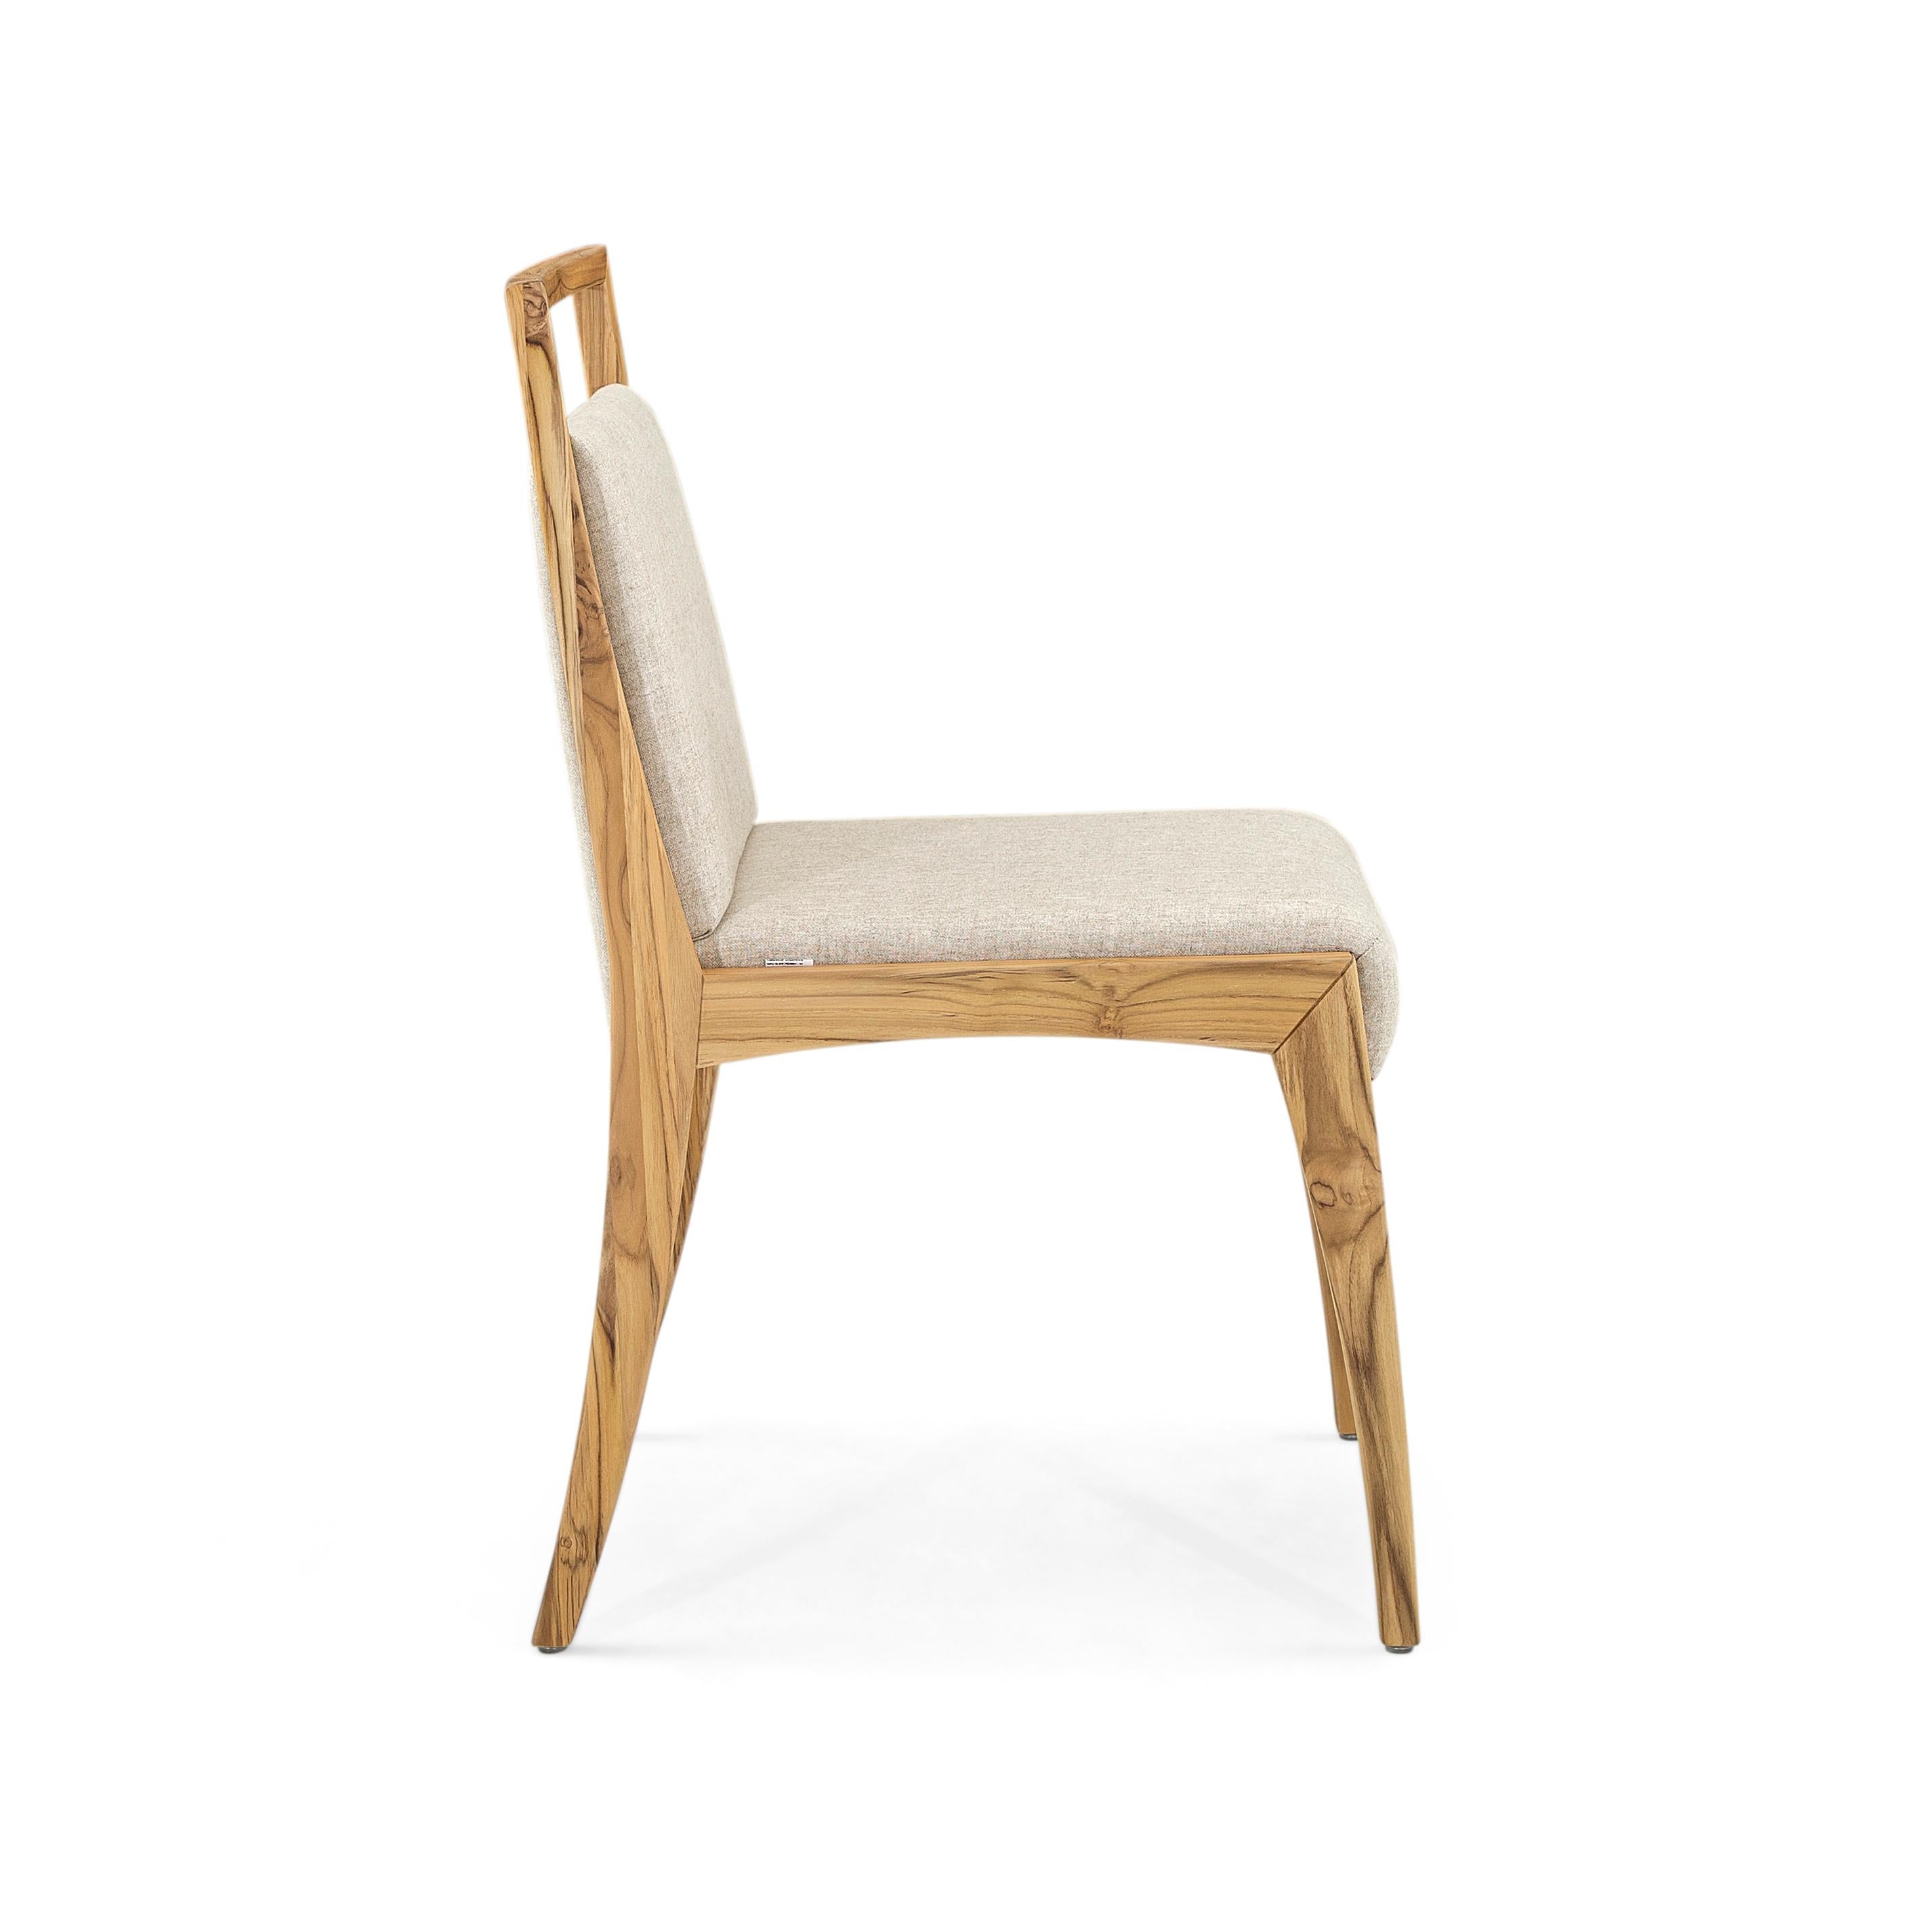 Brazilian Sotto Dining Chair with a Teak Wood Finish and Beige Fabric, set of 2 For Sale